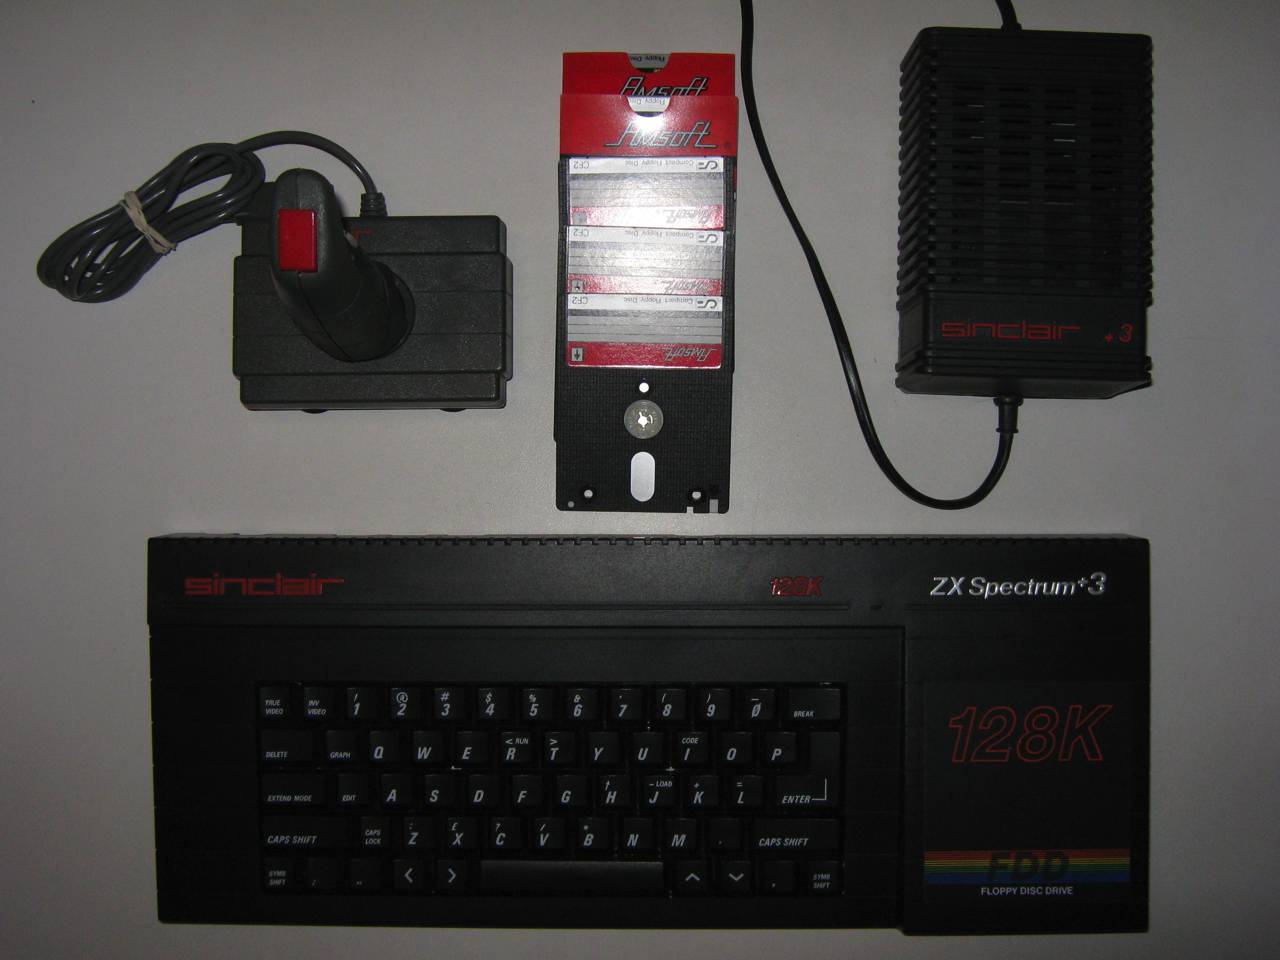 Sinclair (Amstrad) ZX Spectrum +3 with Floppy disk / RGB / DivIDE 